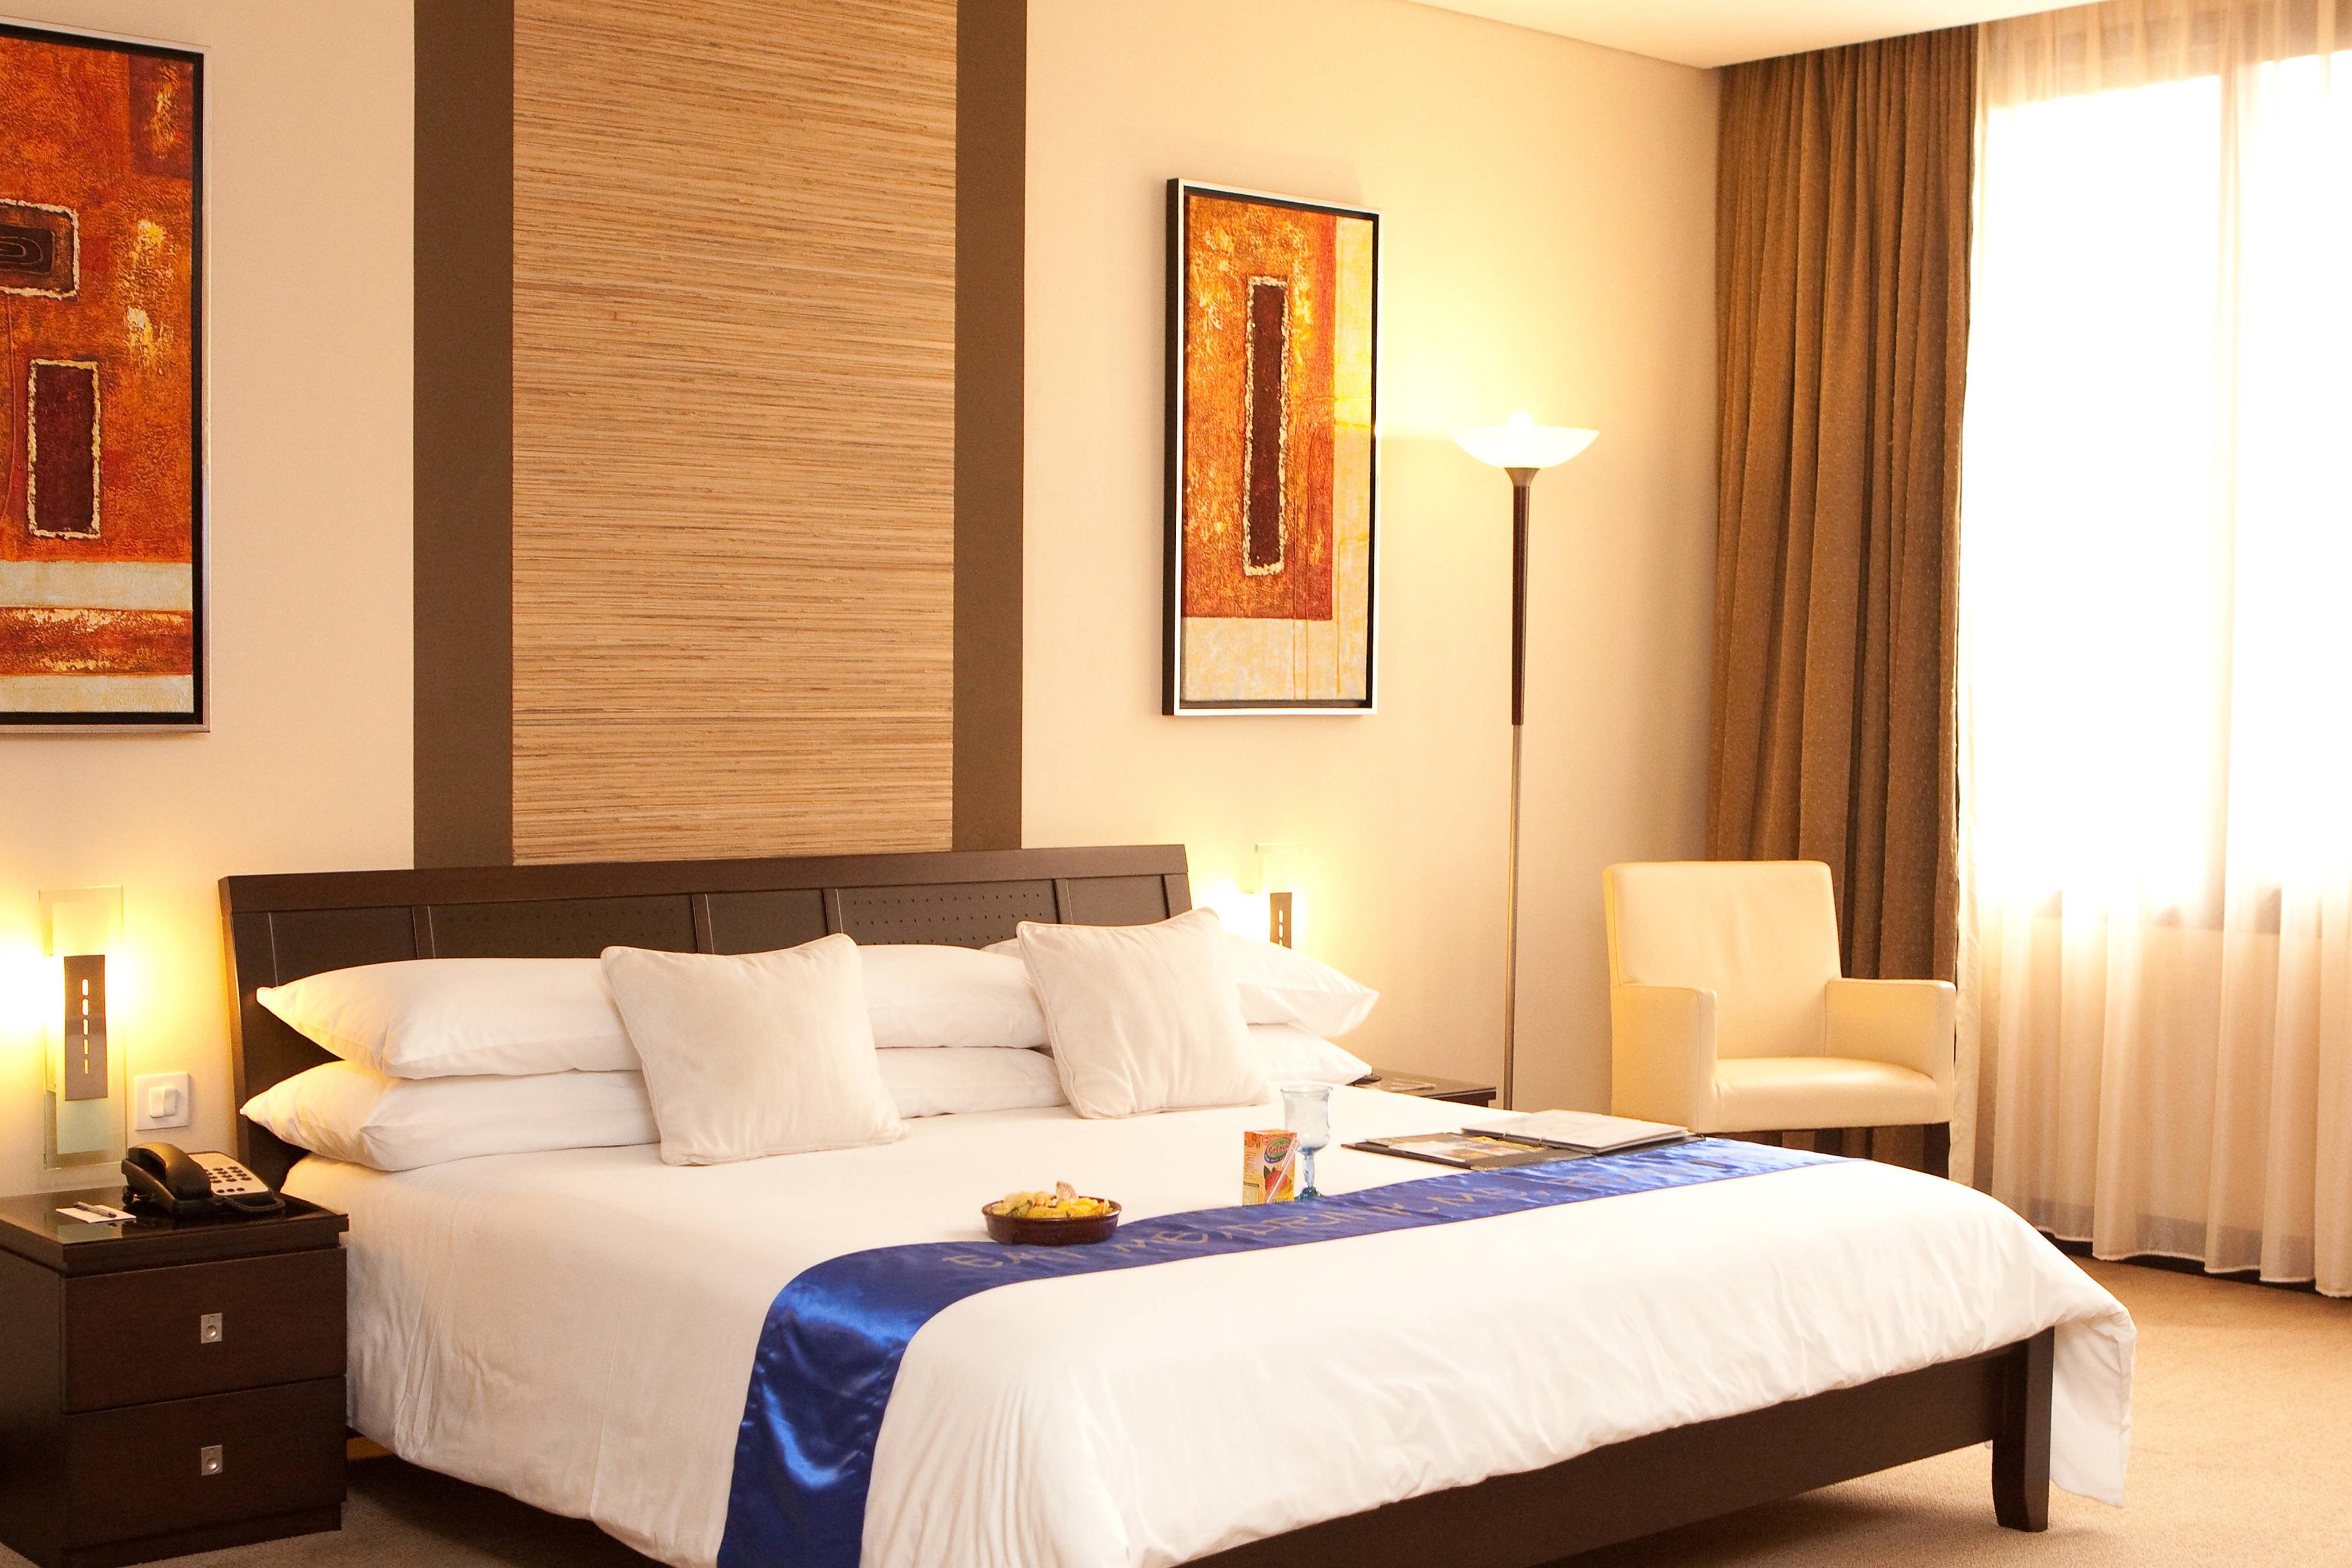 Choose from our 59 hotel rooms and 11 suites, all ideal for business or leisure travel in Kampala.